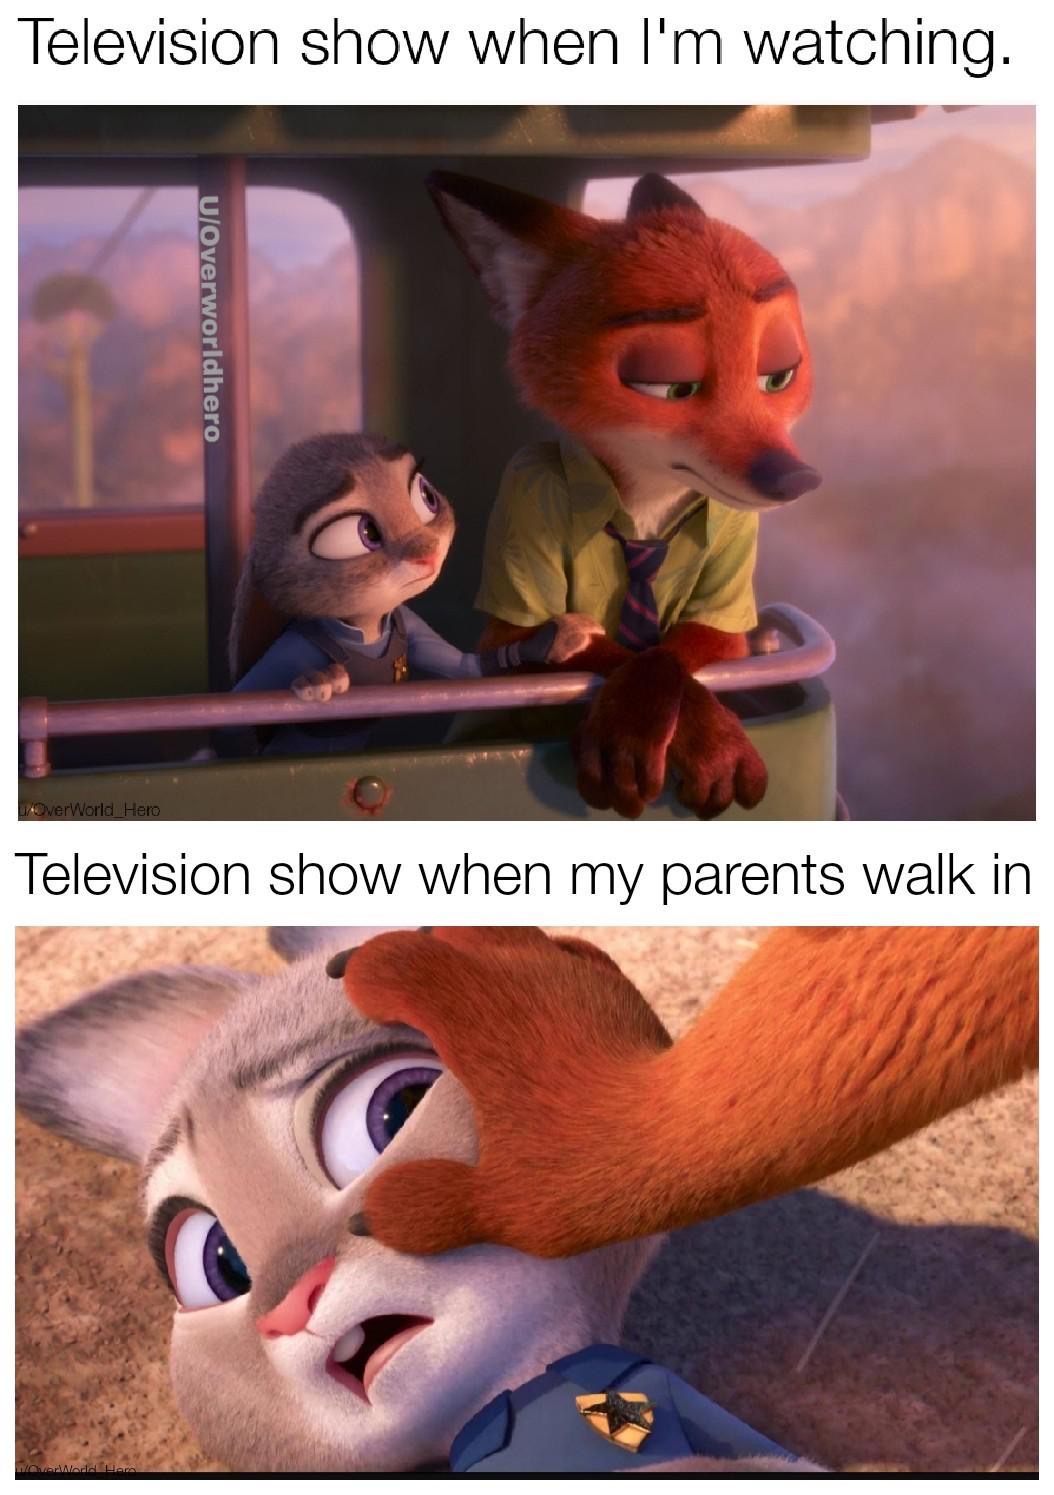 fox zootopia - Television show when I'm watching. UlOverworldhero OverWorld Hero Television show when my parents walk in Model